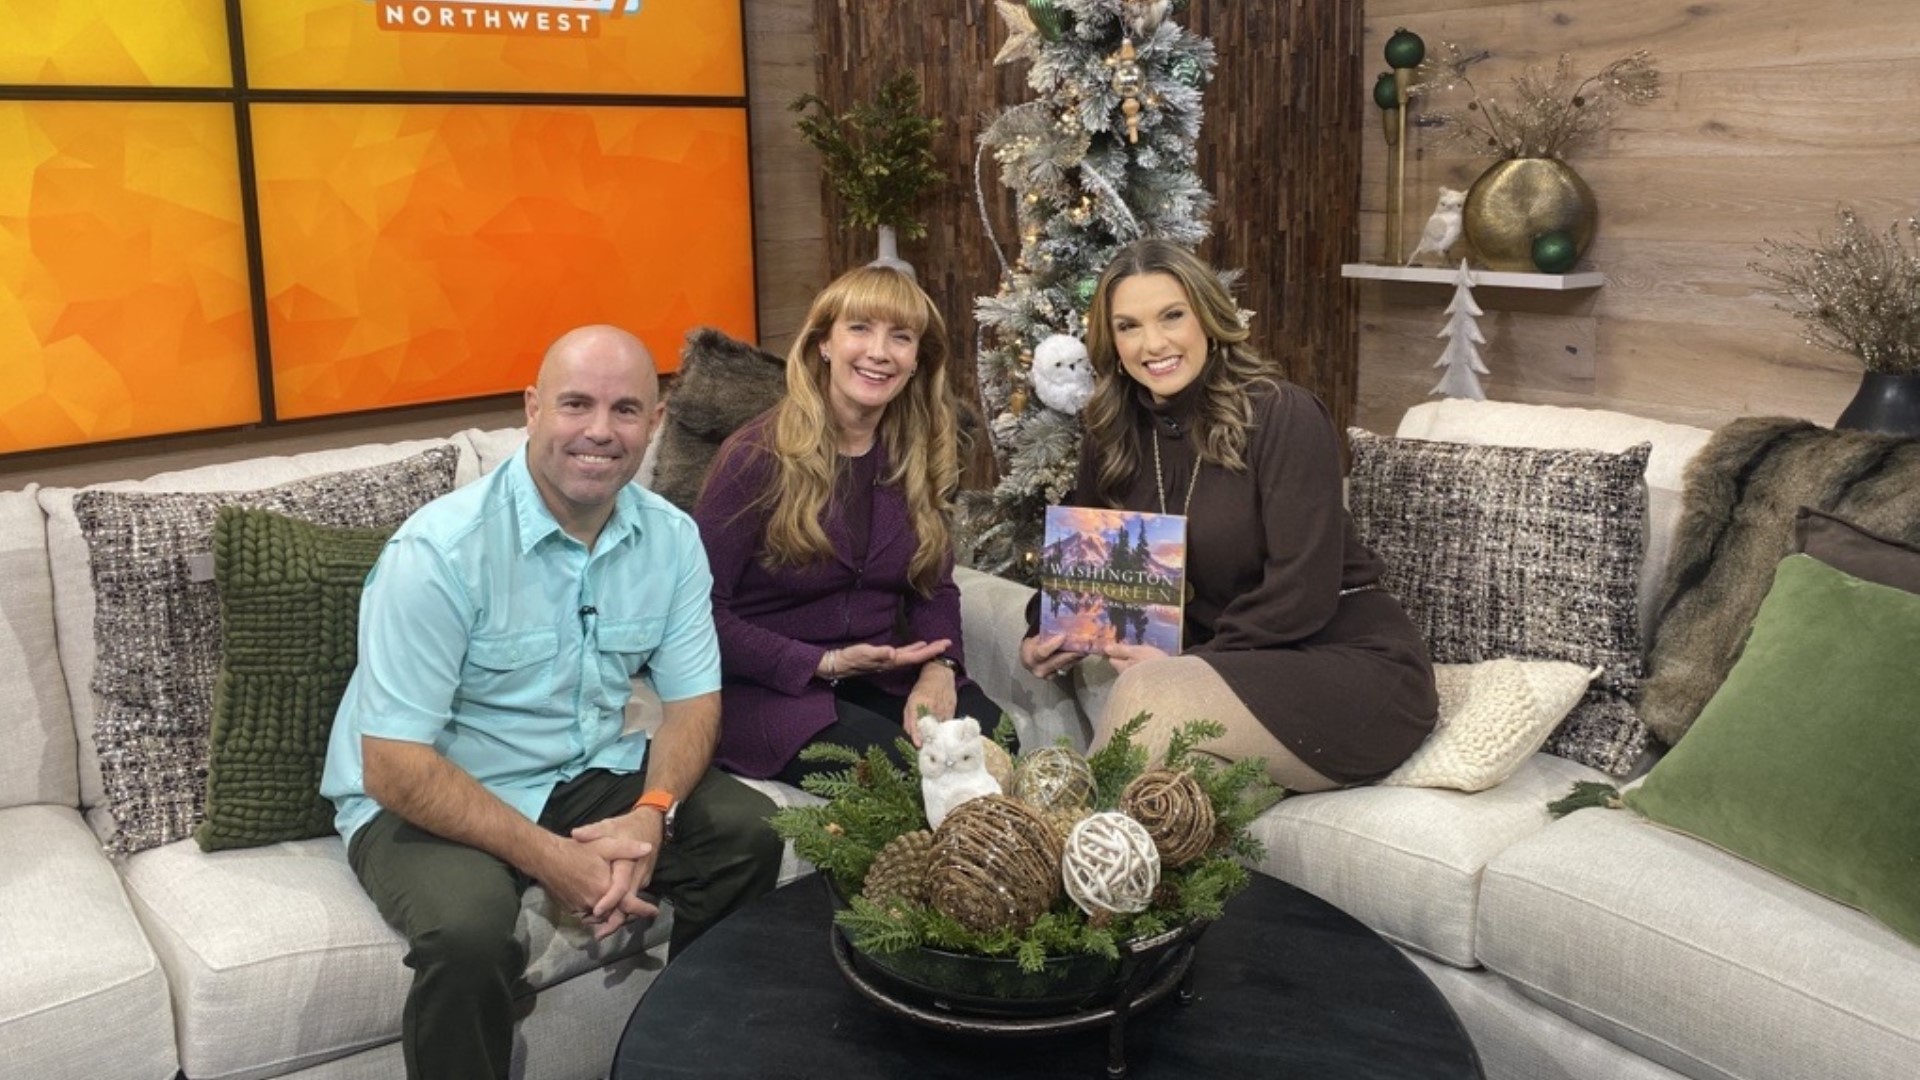 Photographers Erin Babnik and Kevin McNeal discuss their book "Washington, Evergreen" which captures the beauty of our state through photographs. #newdaynw